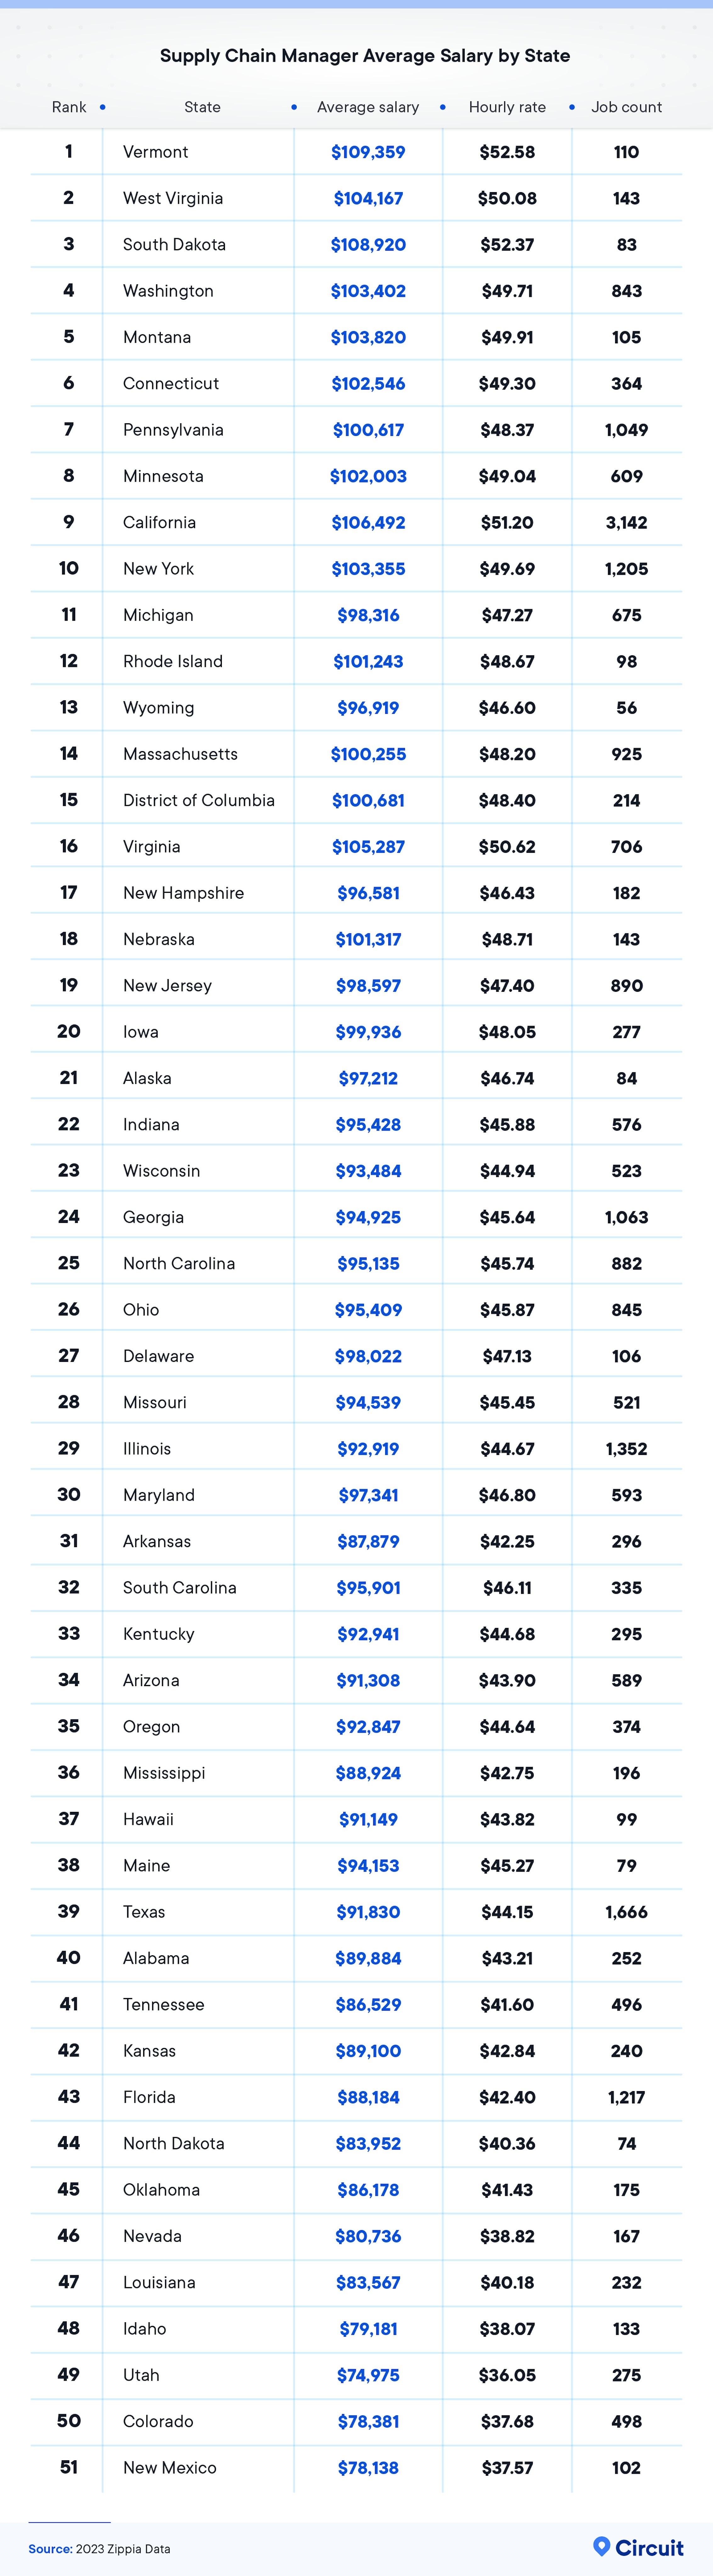 Supply chain manager average salary by state